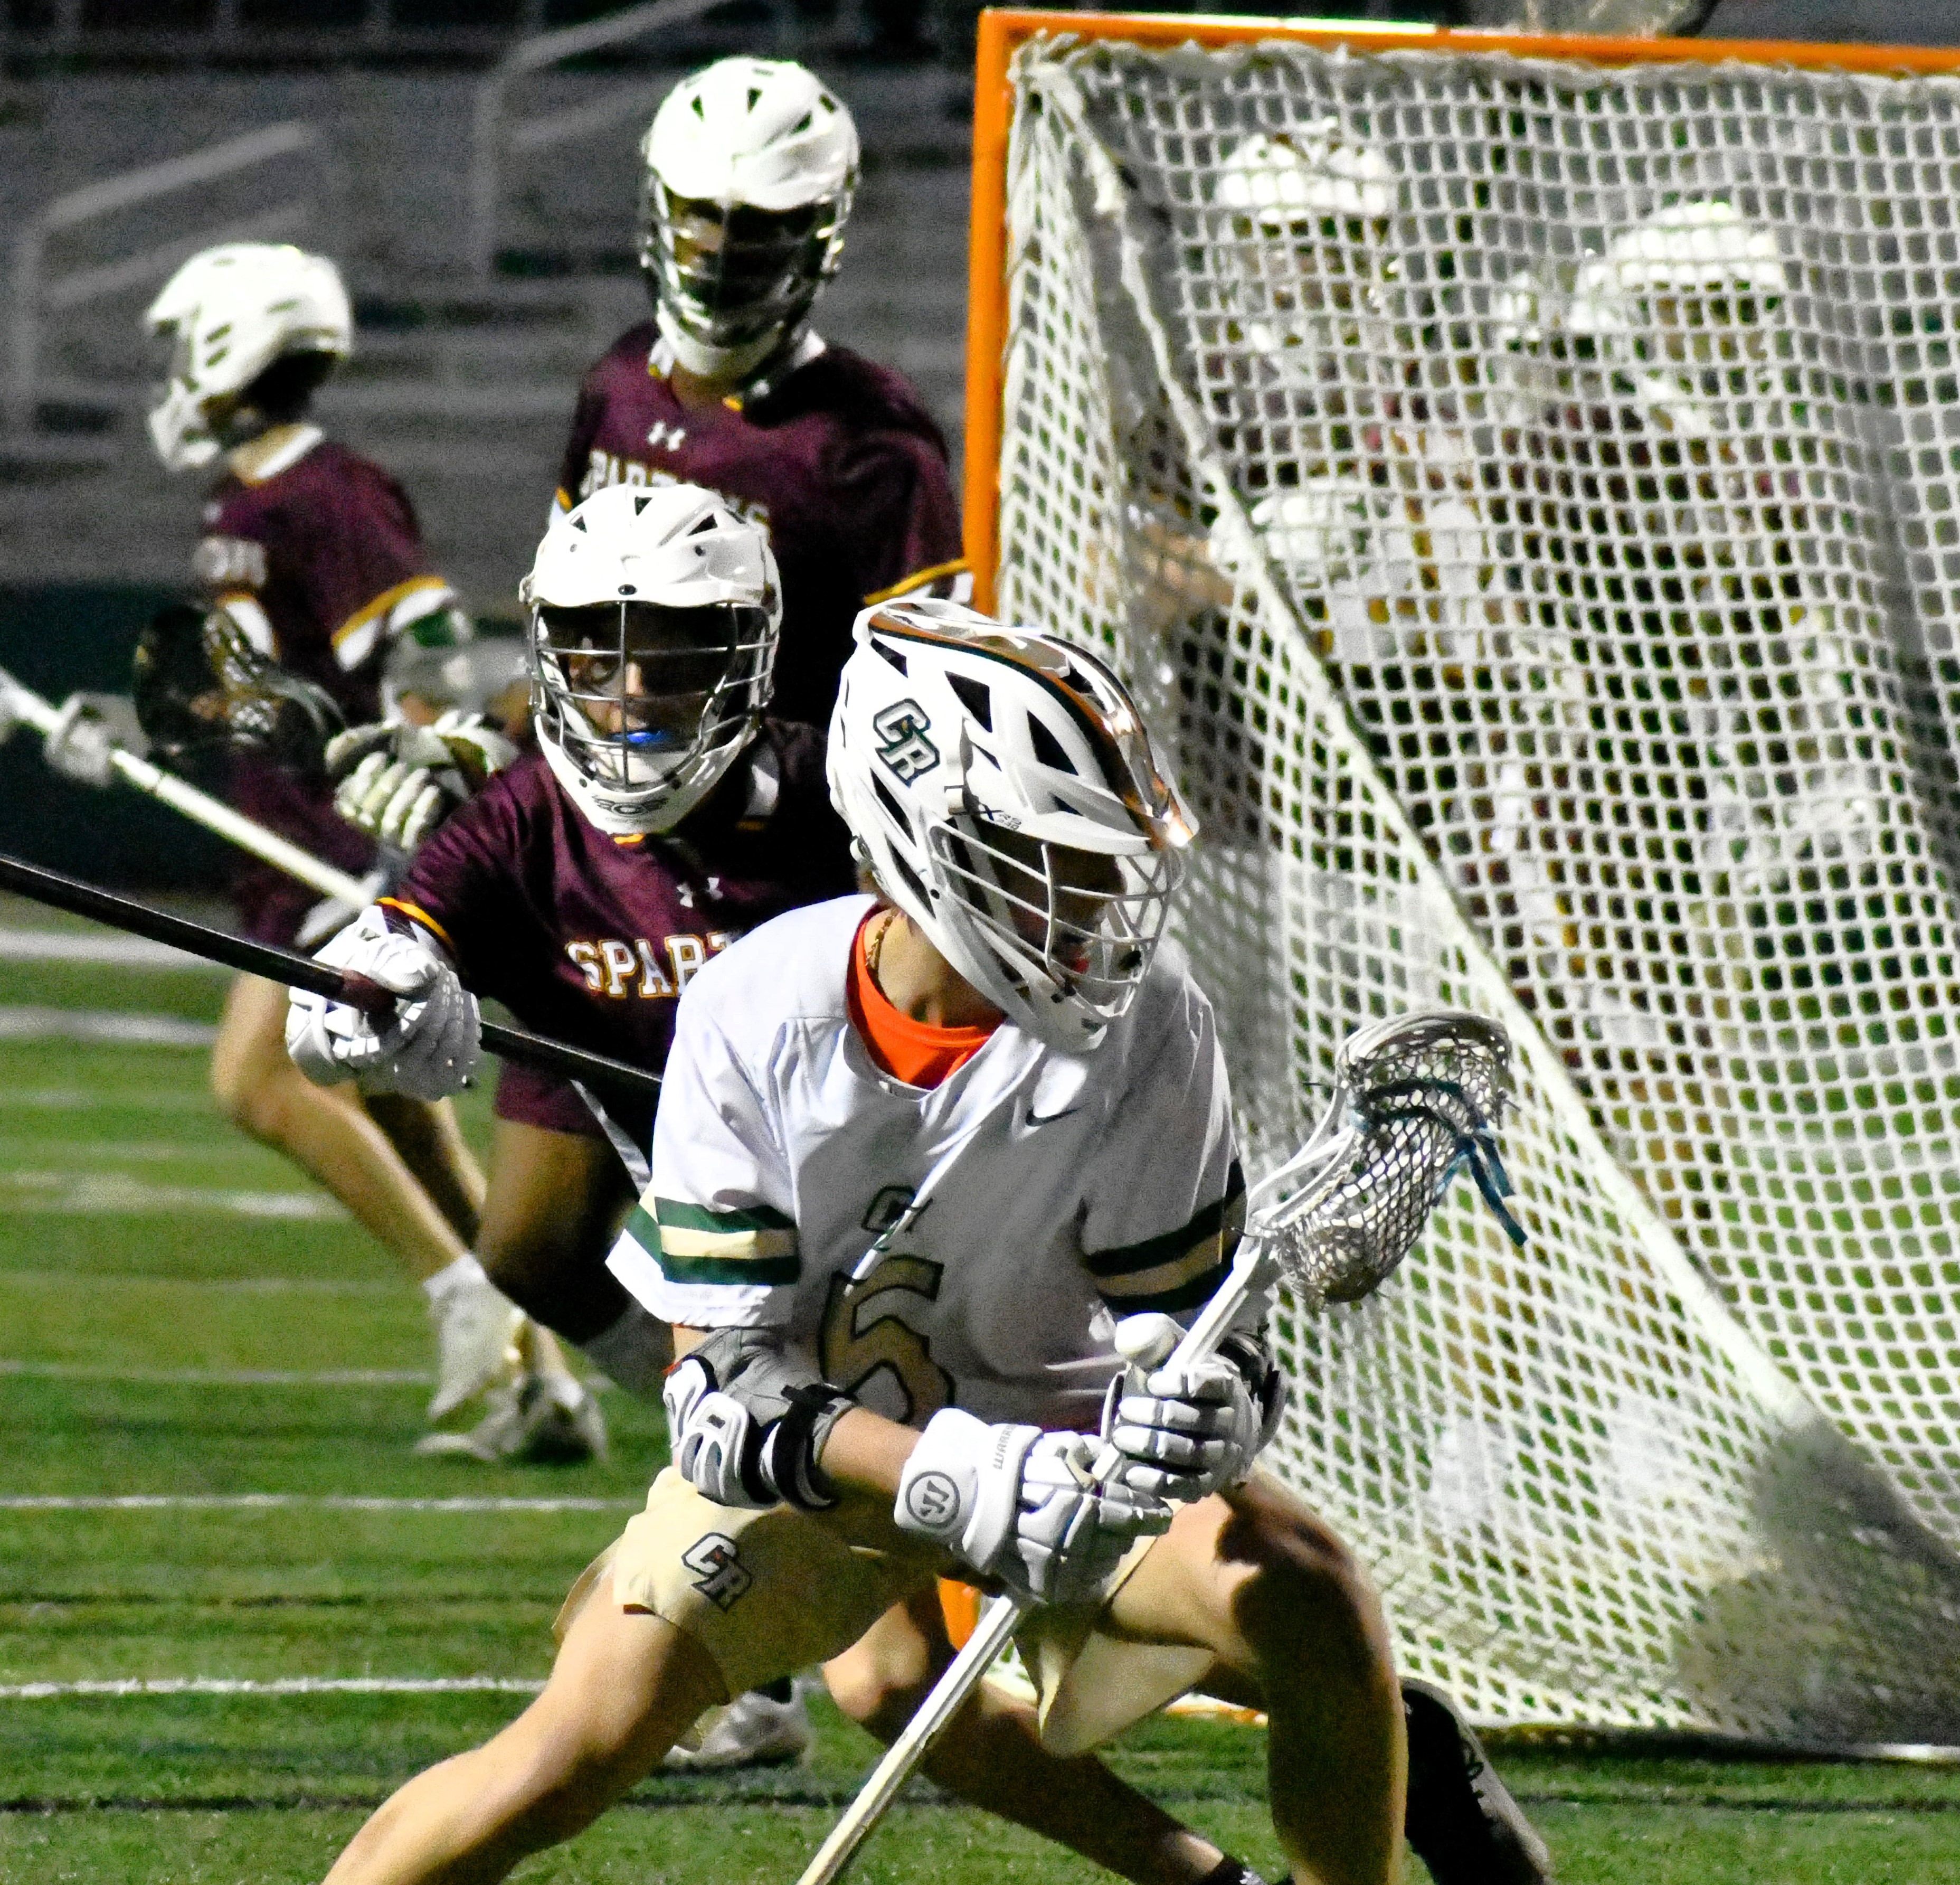 Catawba Ridge lacrosse holds off rally by Sun Valley